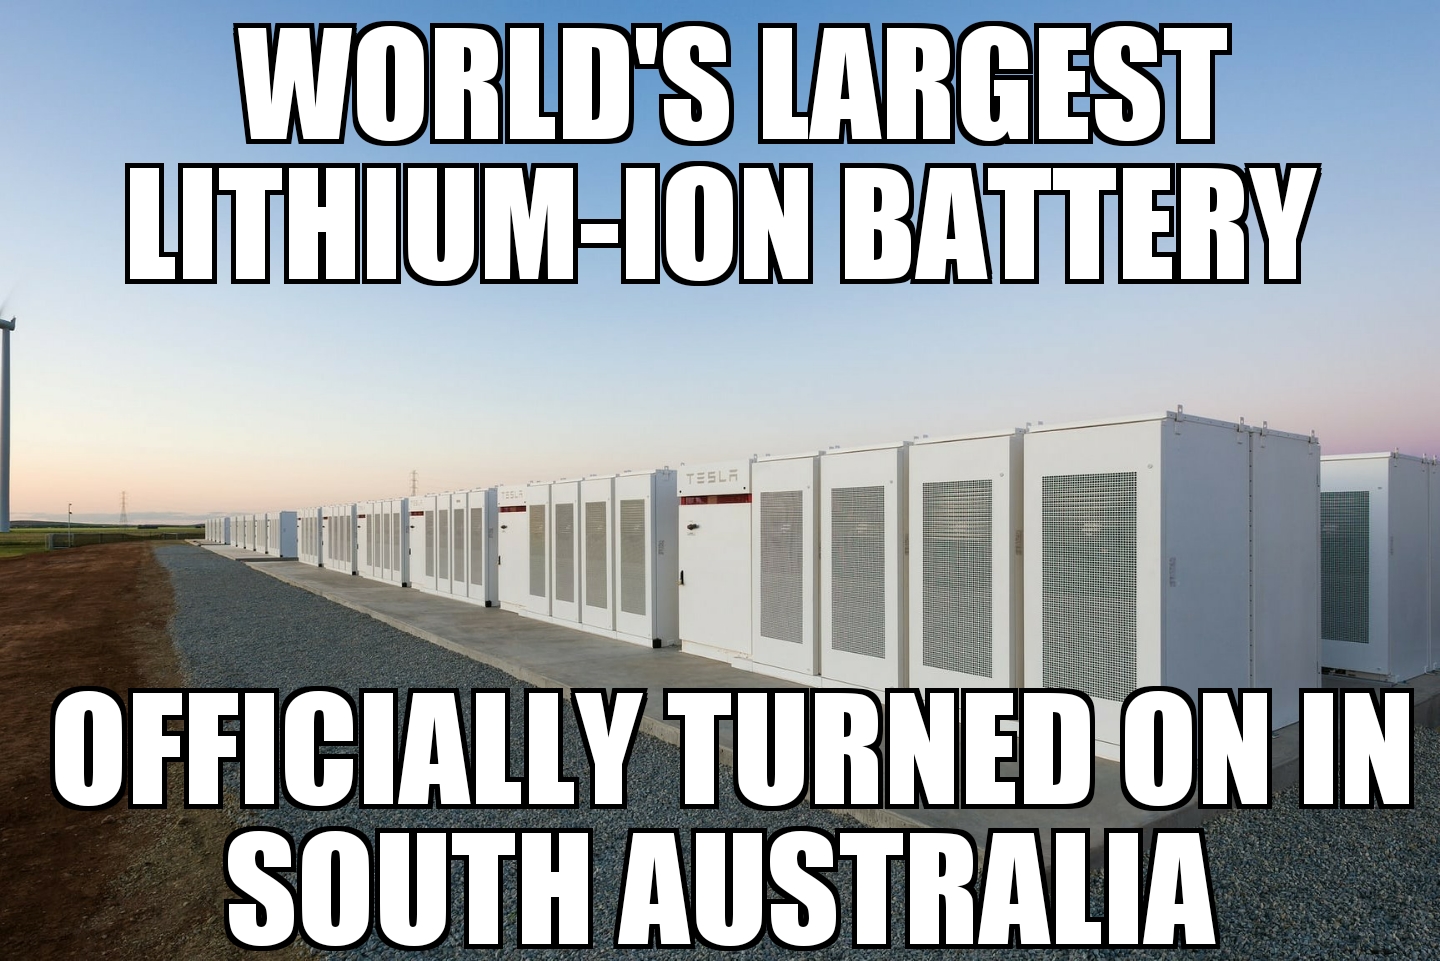 World’s largest lithium-ion battery turned on